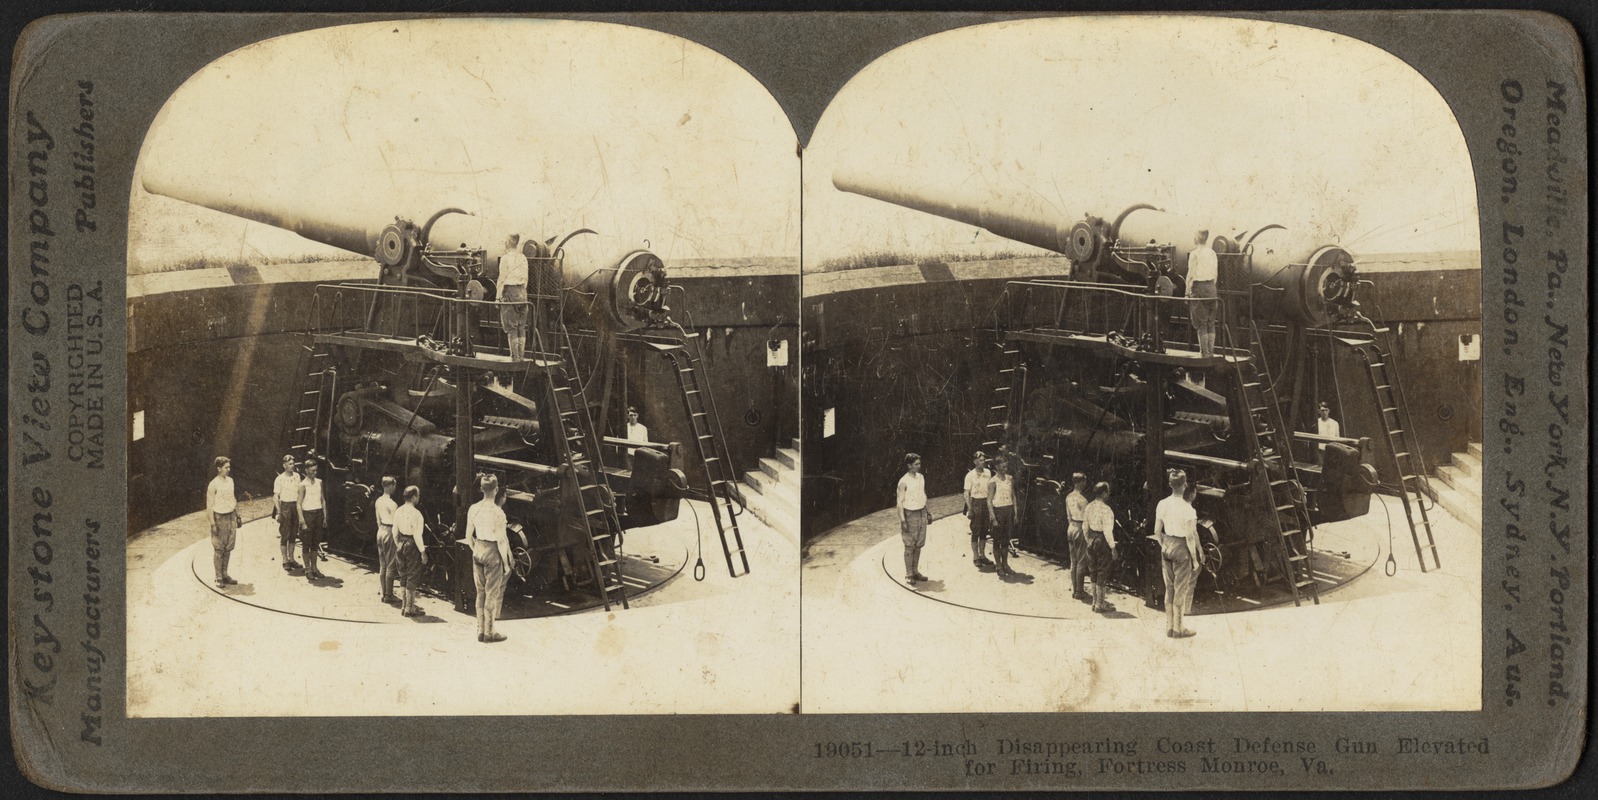 12-inch disappearing coast defense gun elevated for firing, Fortress Monroe, Va.